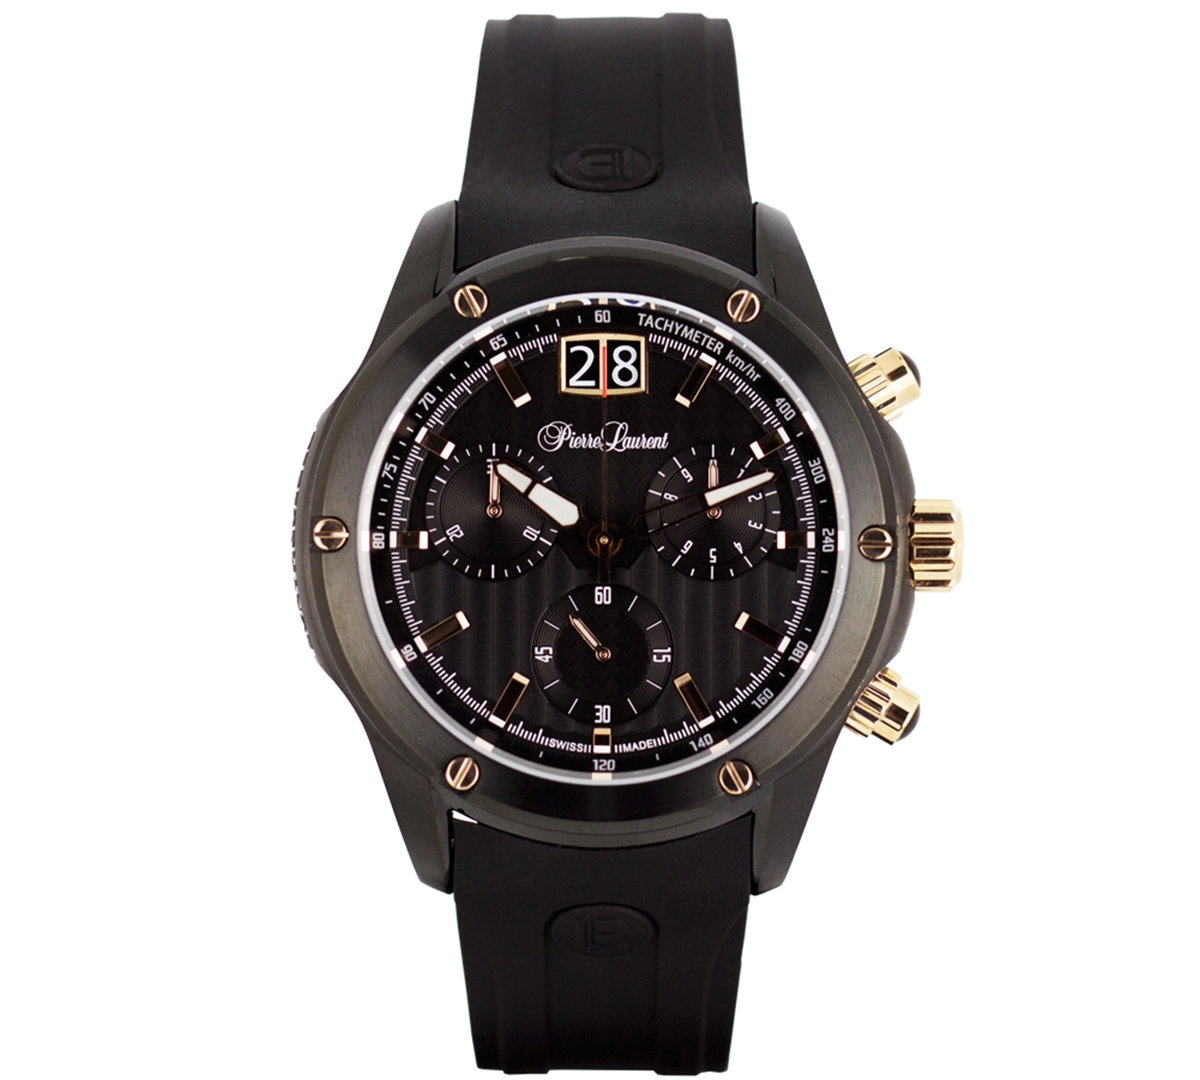 Pierre Laurent Men's Performance Swiss Chronograph Rubber Strap Watch 45mm In Black Pvd Over Stainless Steel